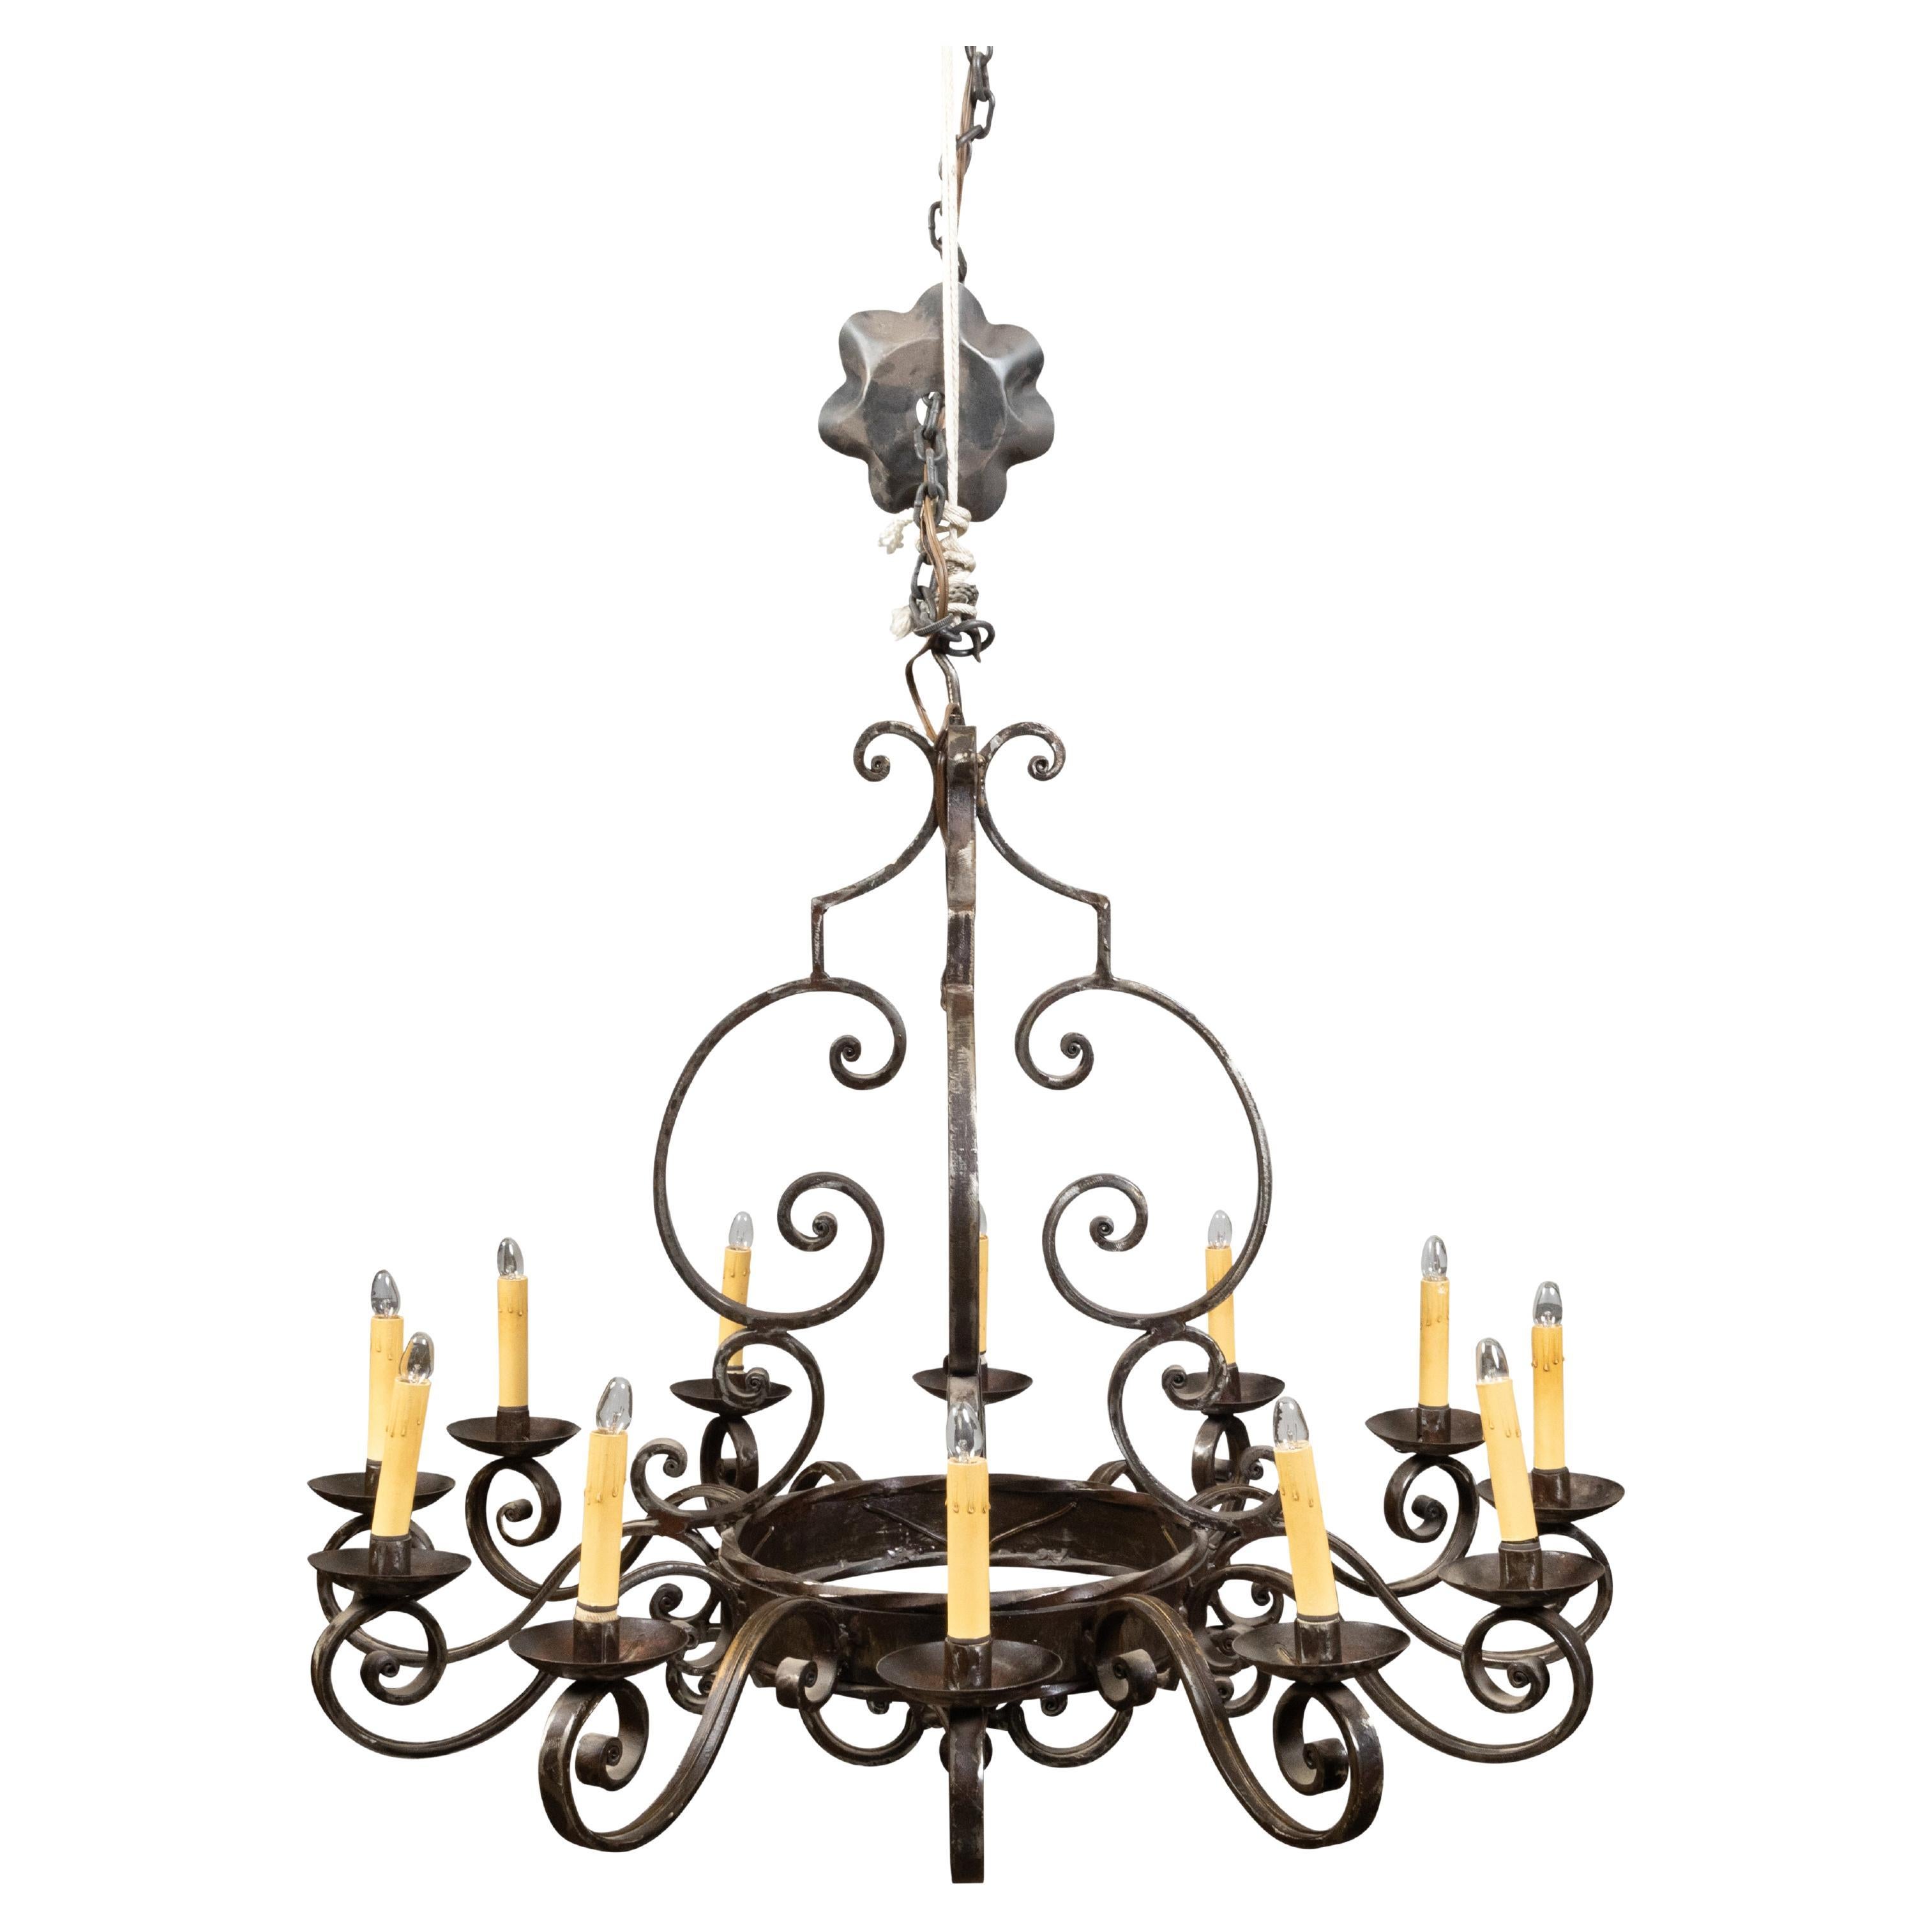 Midcentury French Steel 12-Light Chandelier with Scrolls and Dark Patina